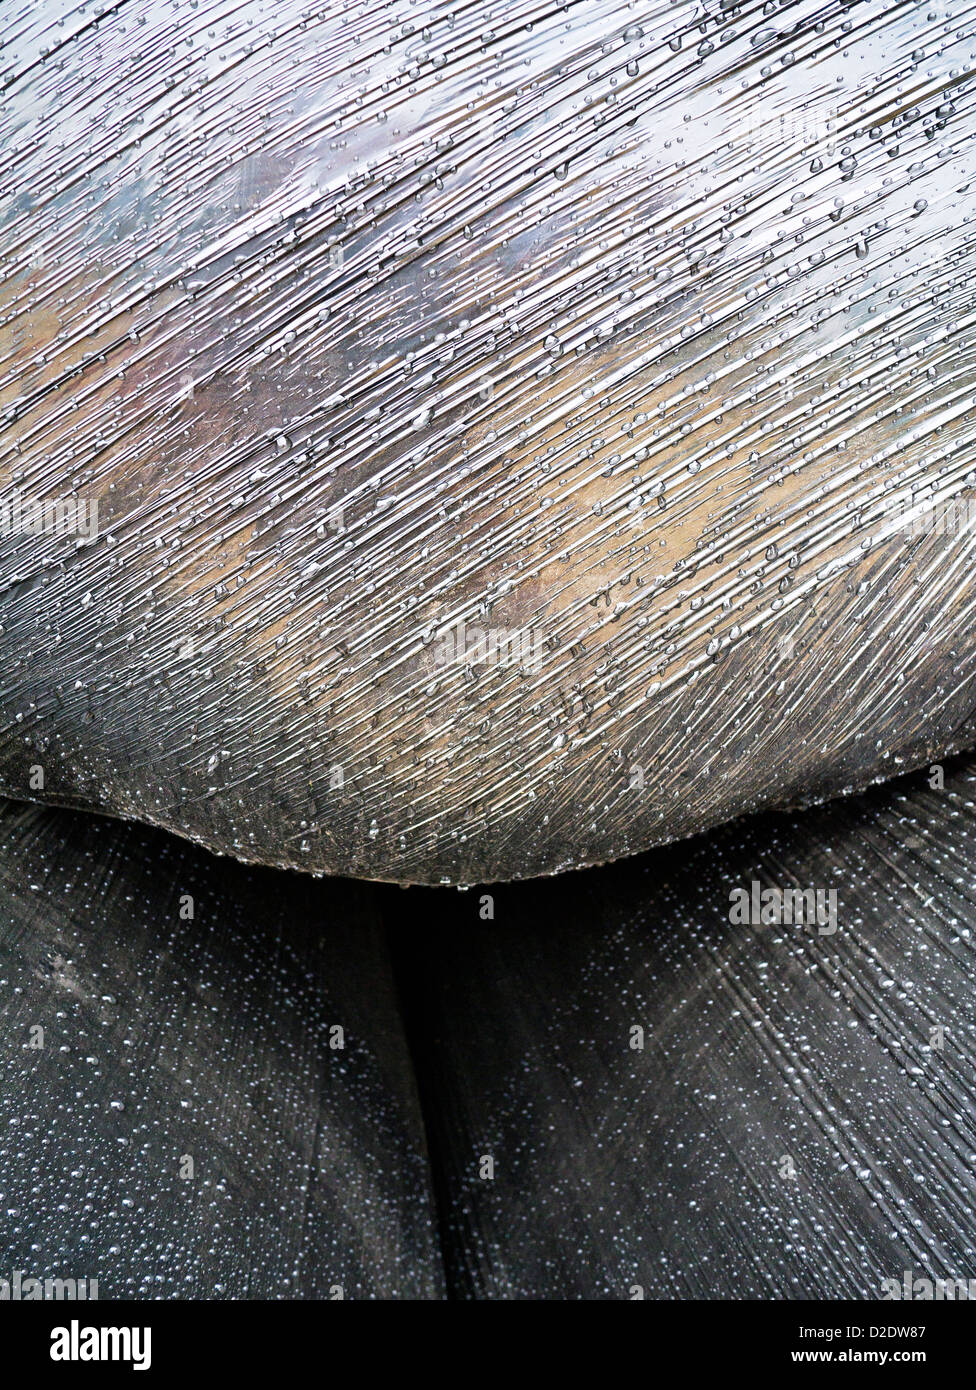 Bales of Straw Wrapped in Black Plastic Bags Stock Photo